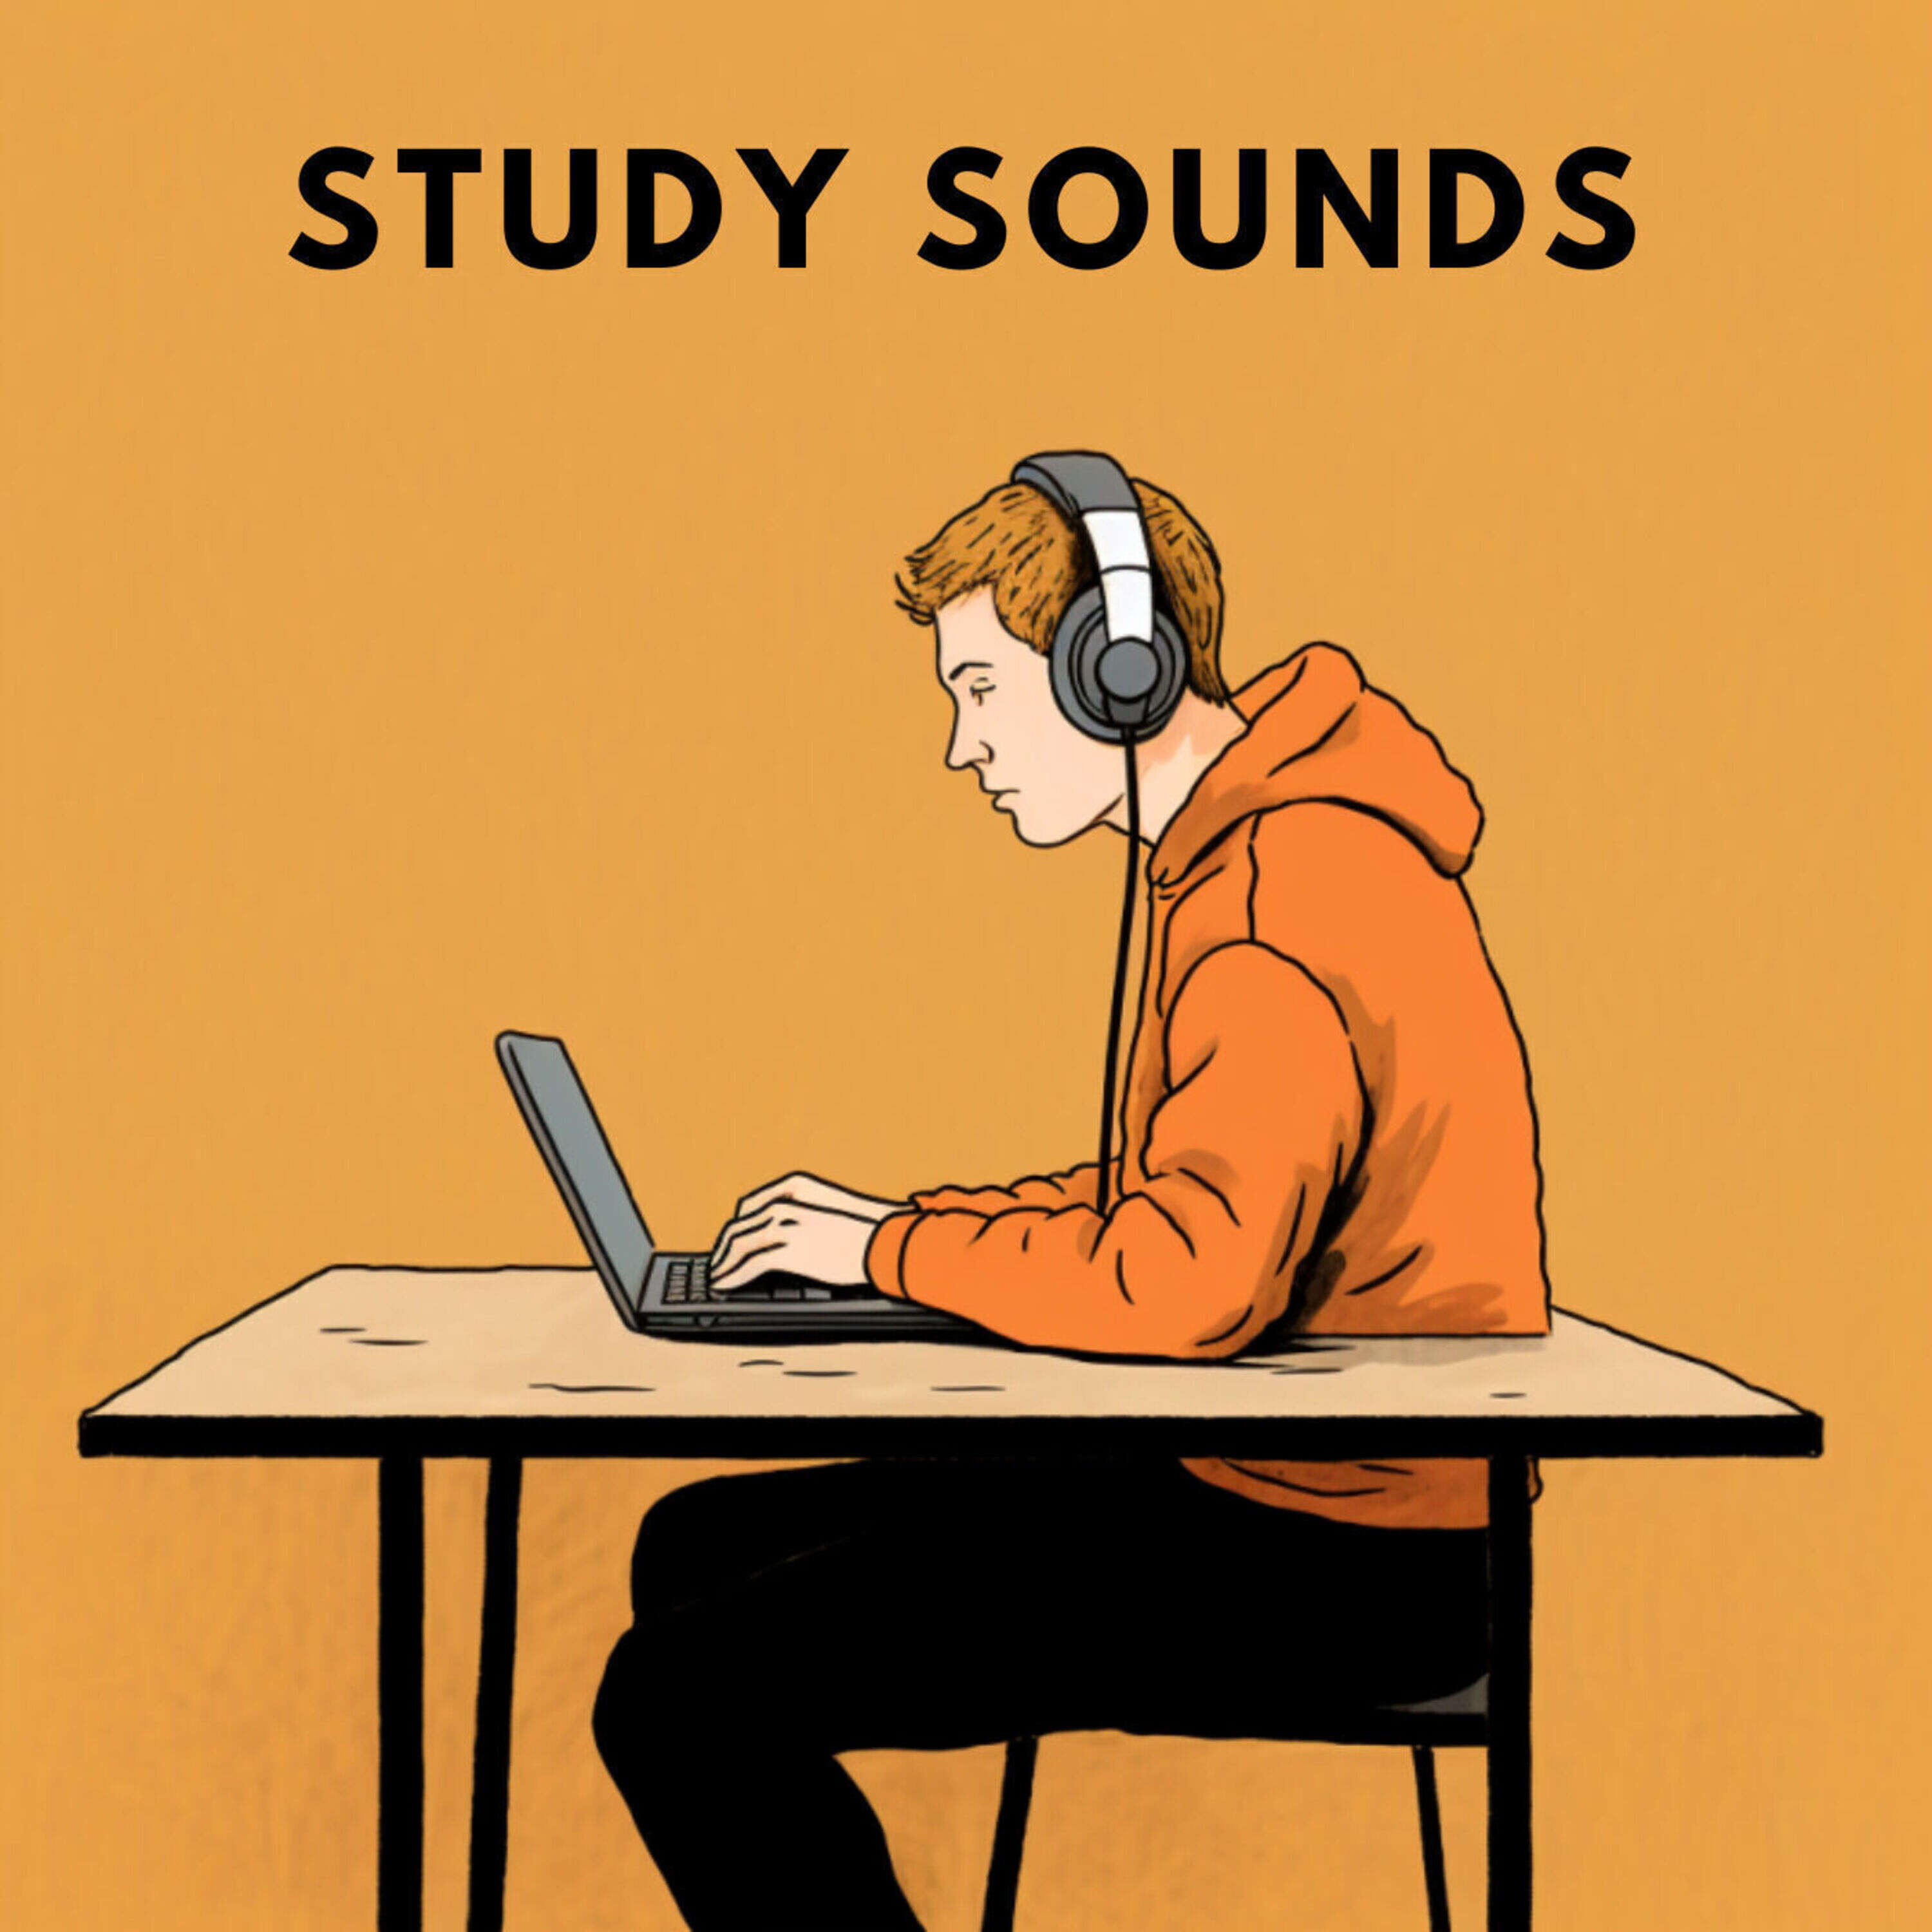 || Study sounds To Make You Feel Like A Scientist Who’s About To Make A Groundbreaking Discovery ||